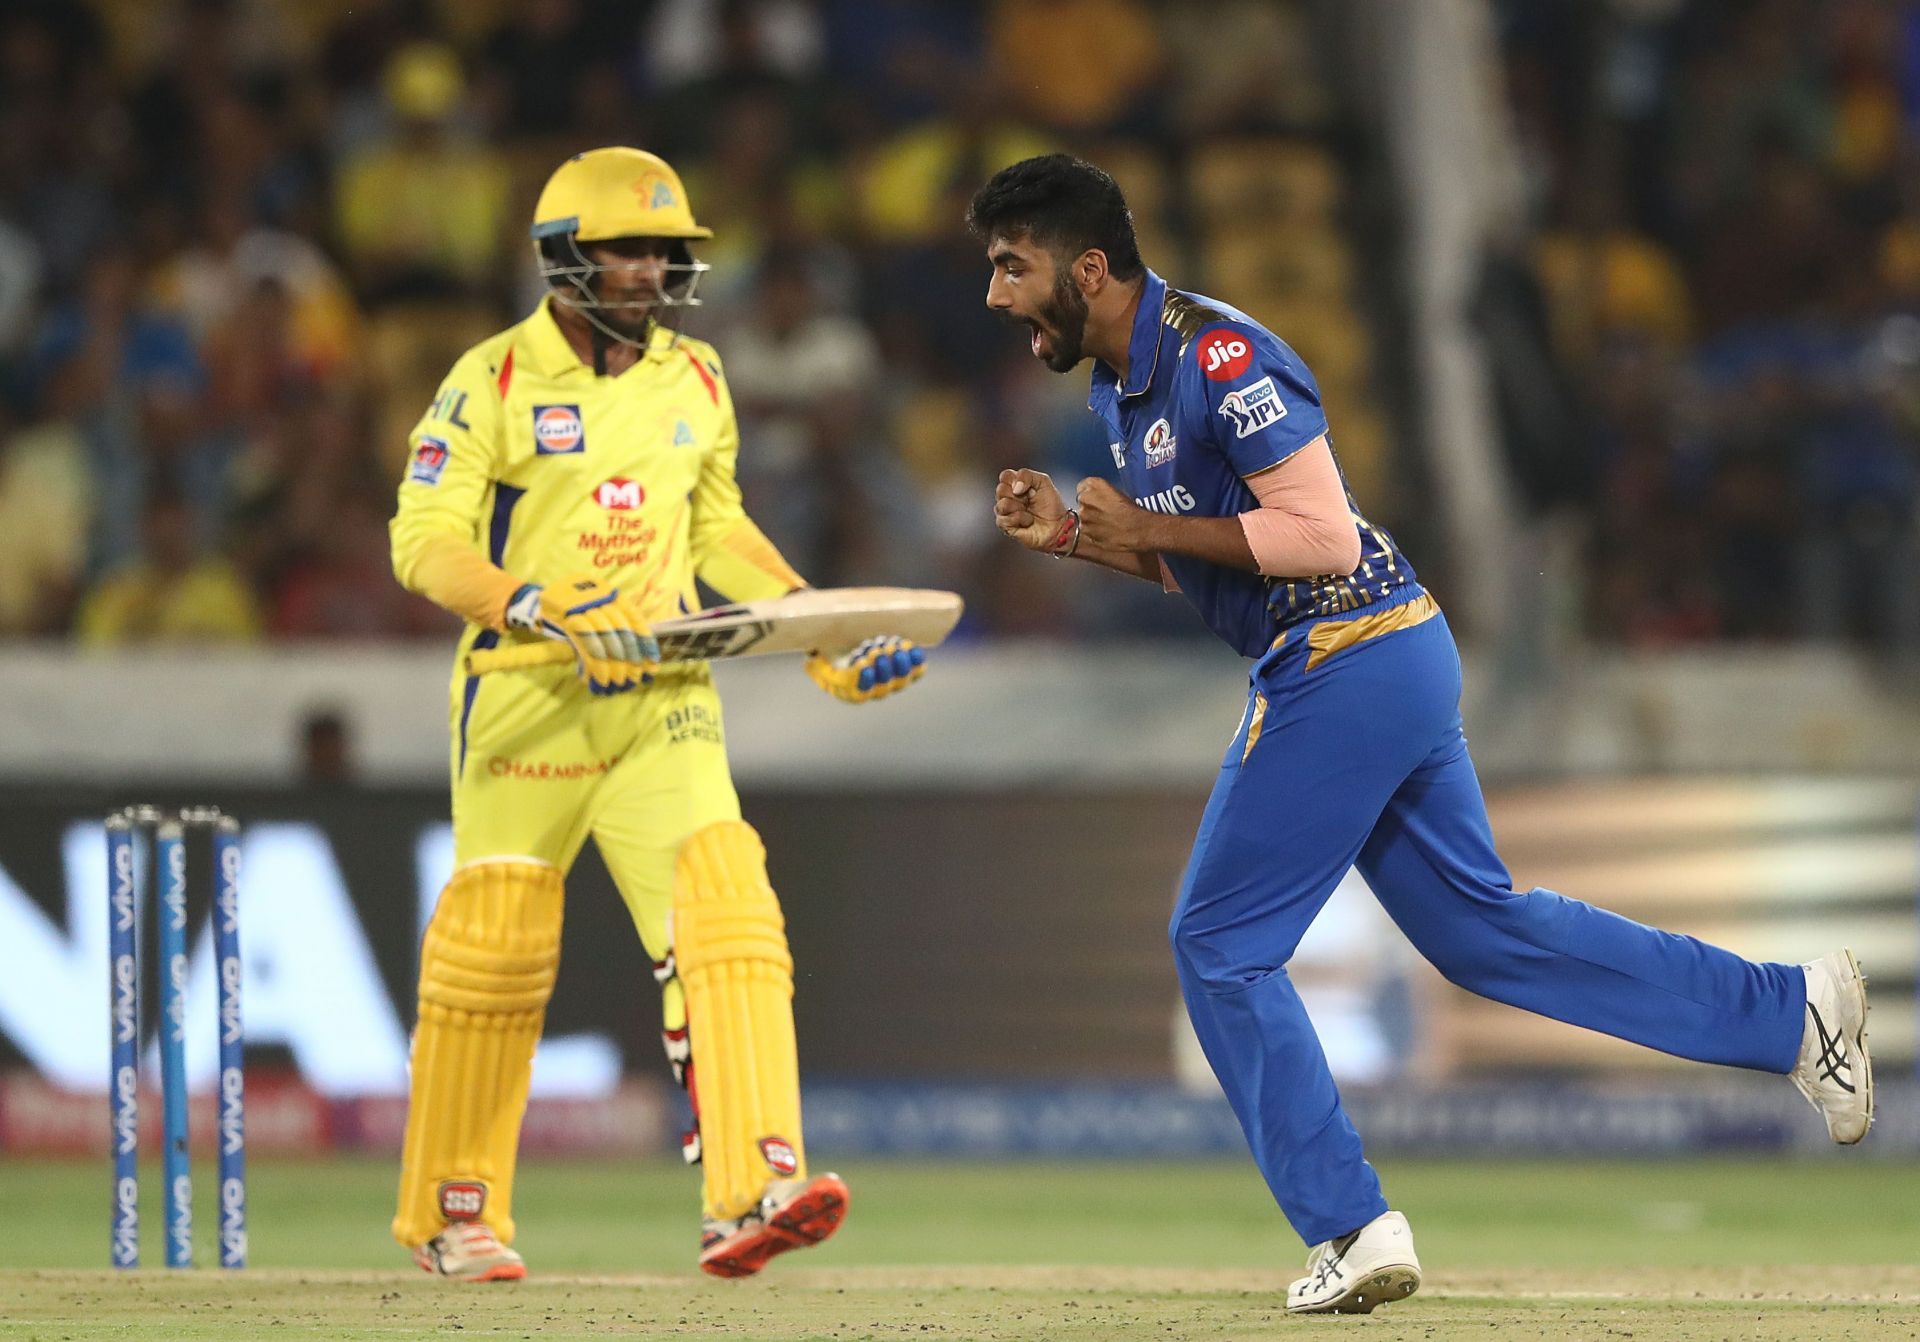 Jasprit Bumrah has dominated death overs bowling in IPL